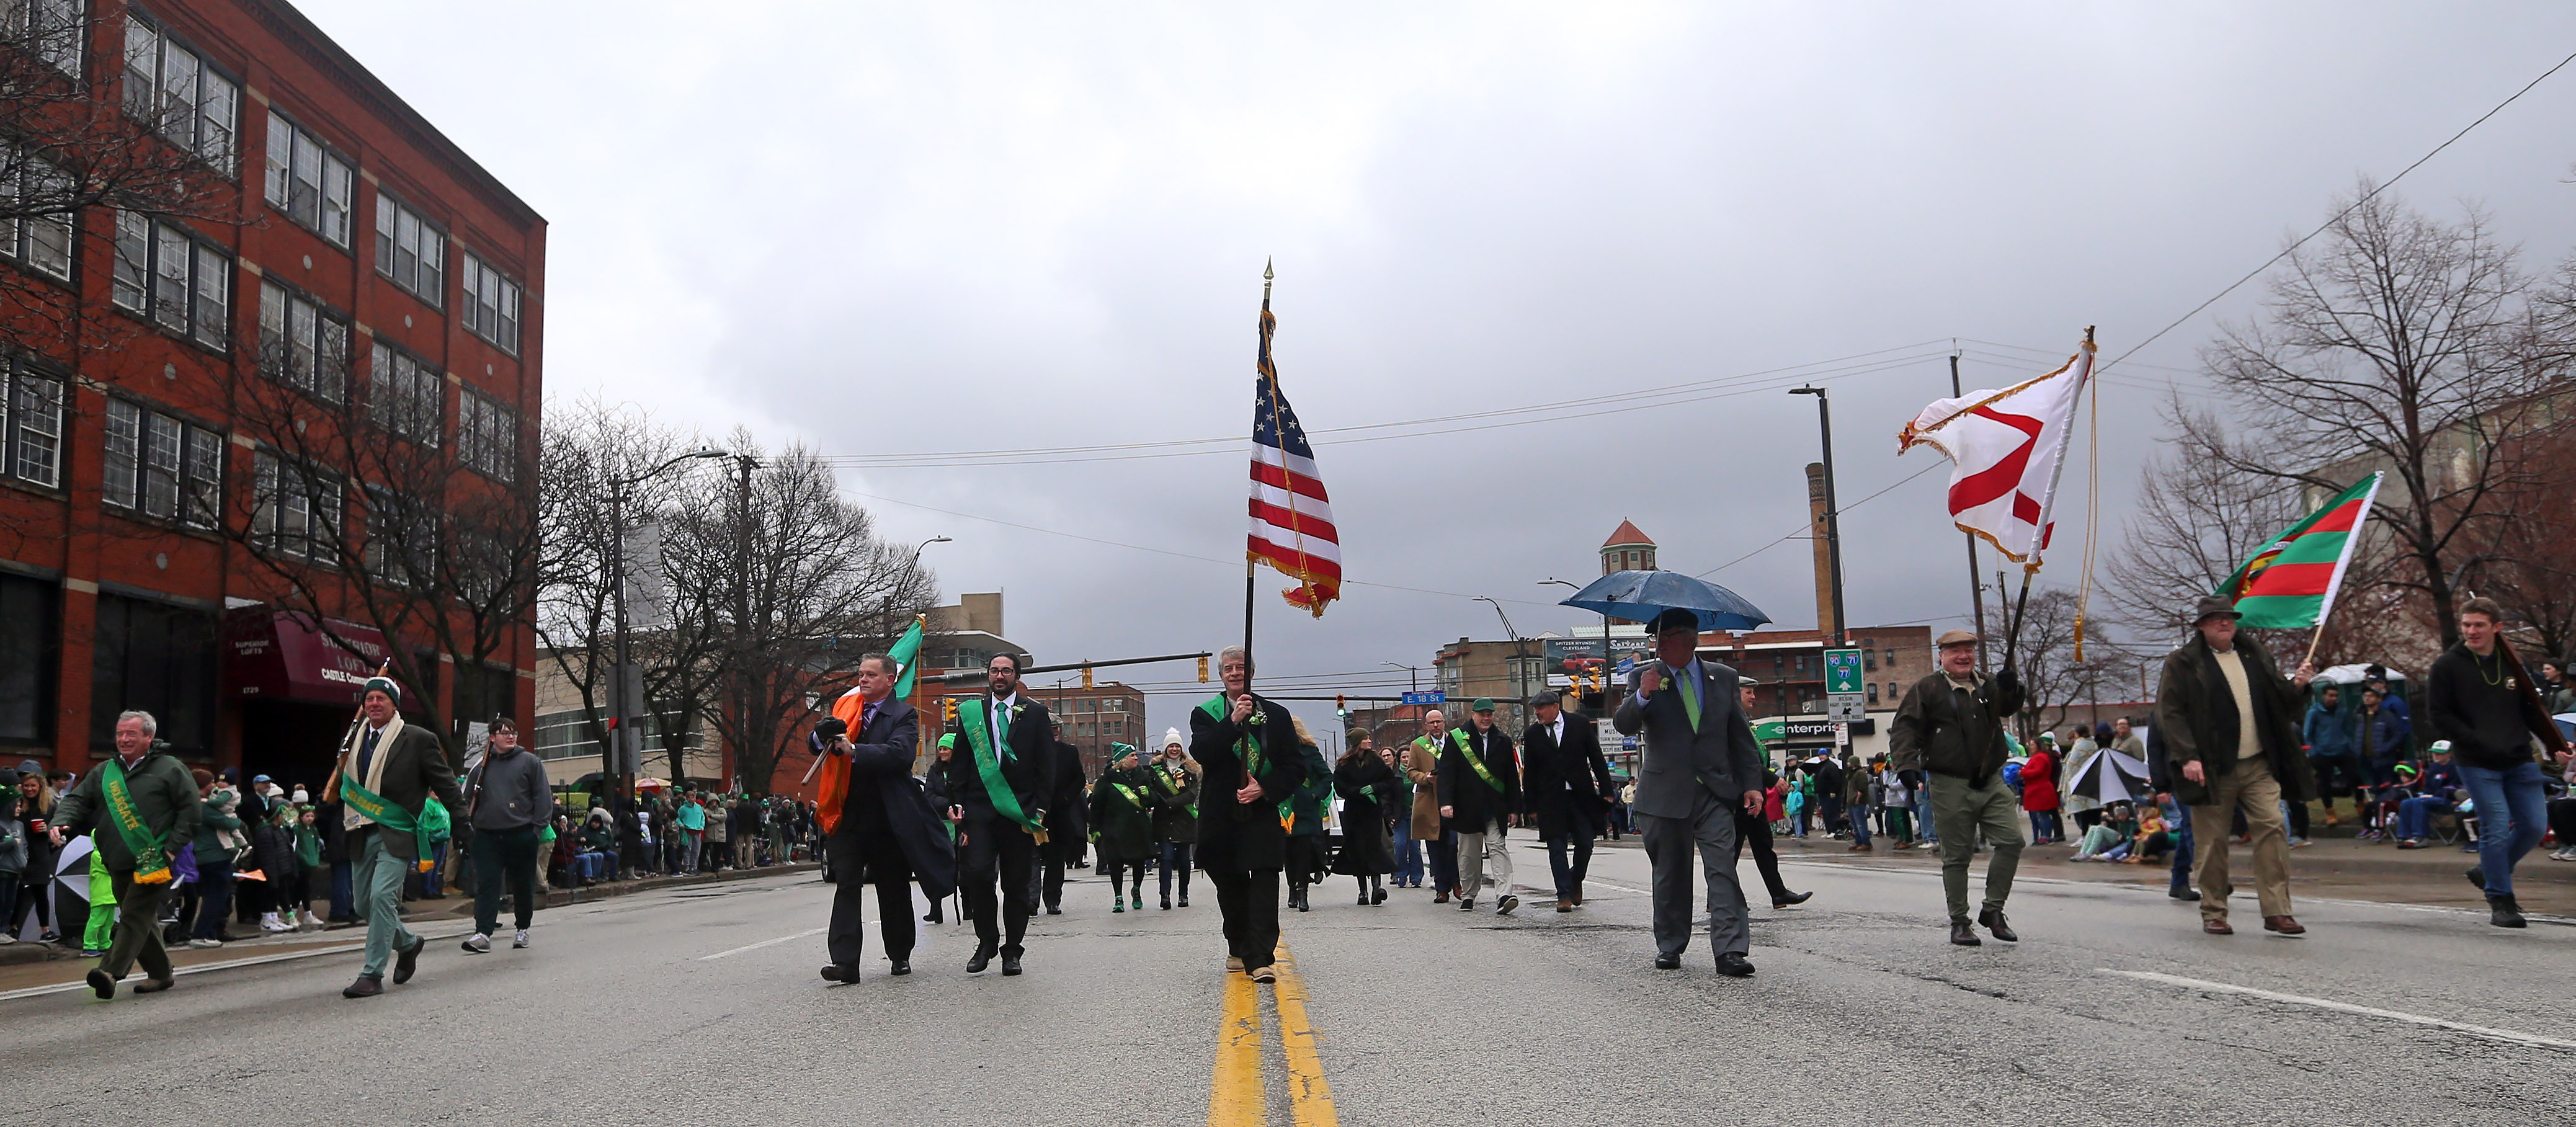 Cleveland St. Patrick’s Day parade, March 17, 2023